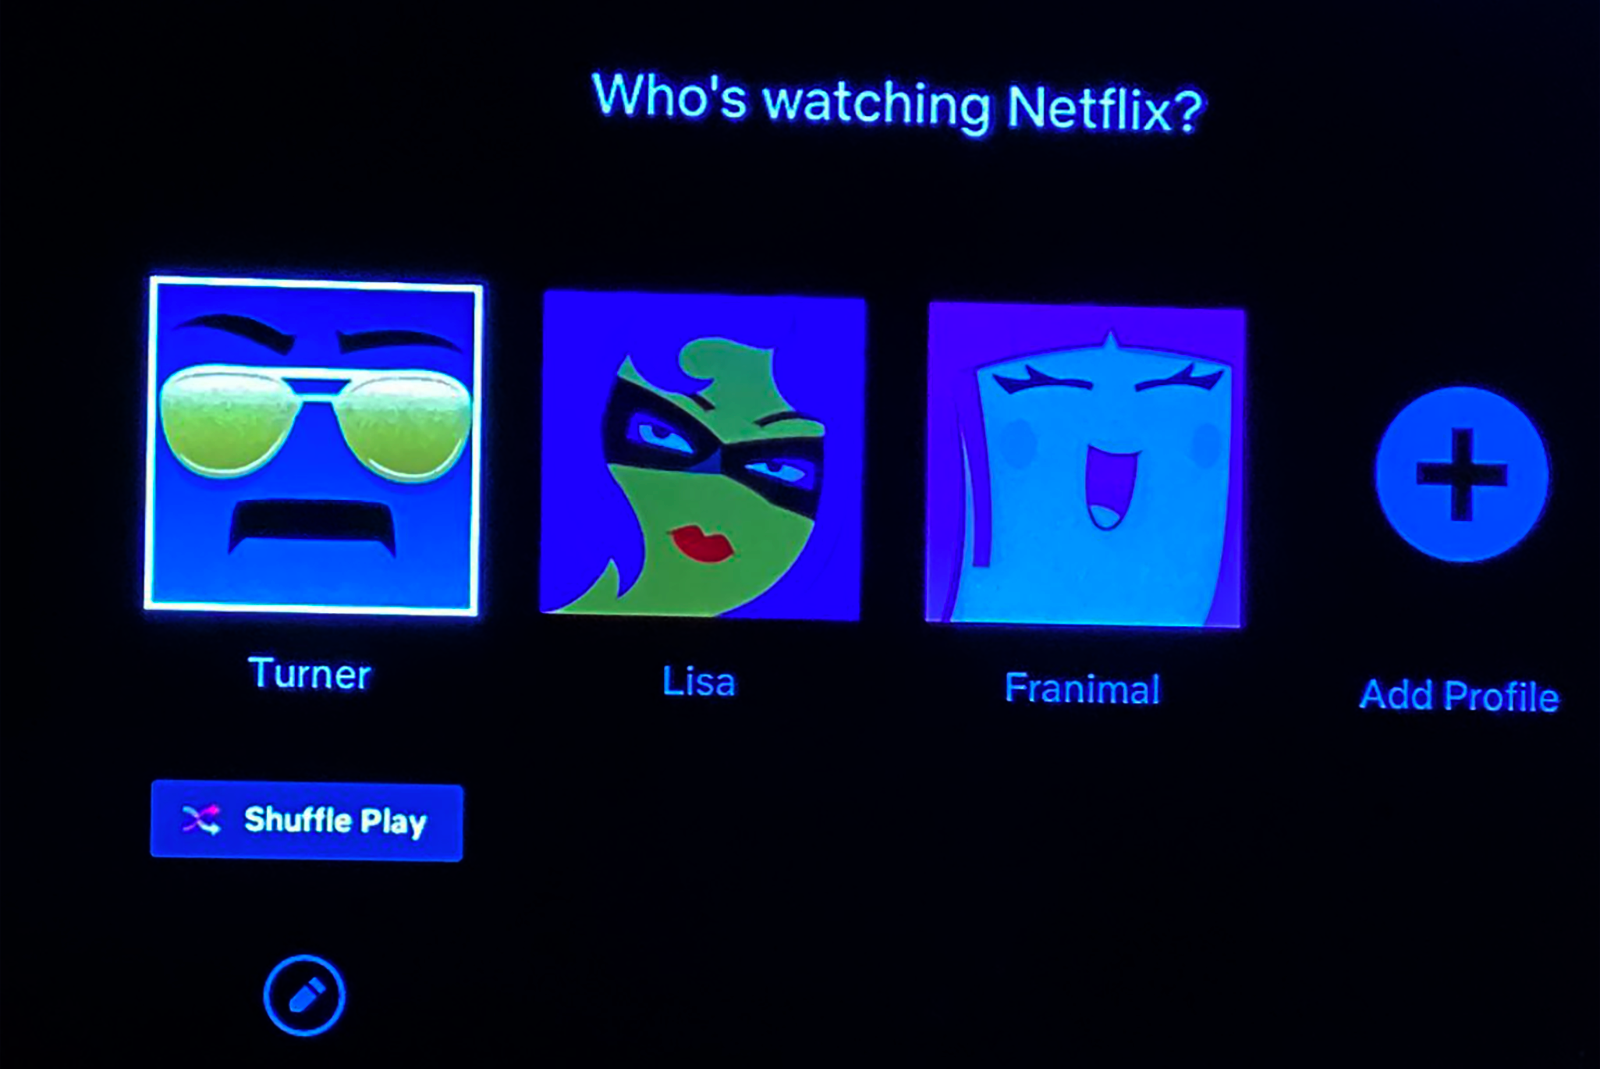 Netflix confirms its shuffle feature will globally launch this year photo 1